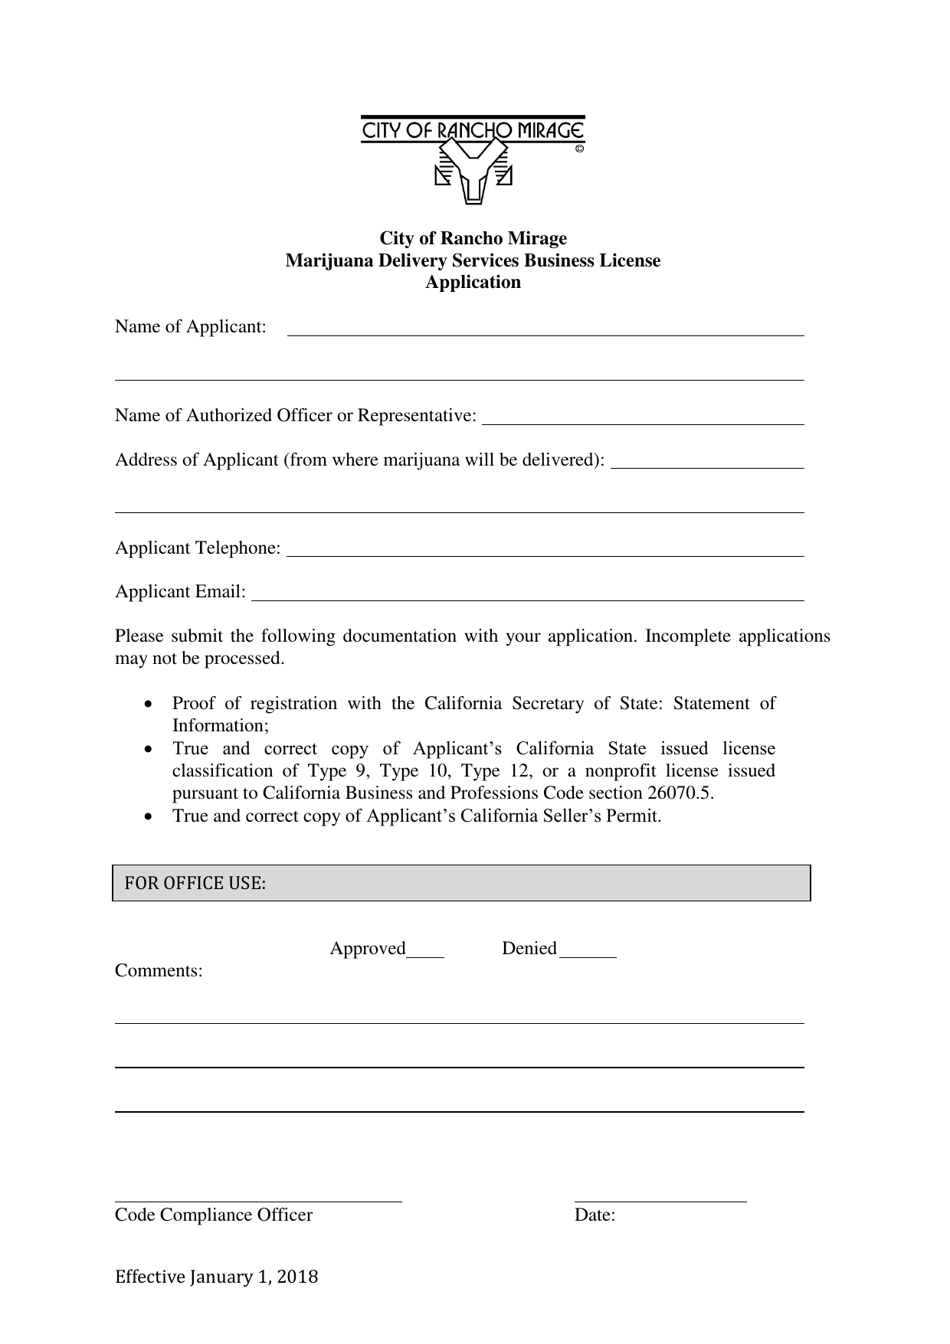 Marijuana Delivery Services Business License Application - City of Rancho Mirage, California, Page 1